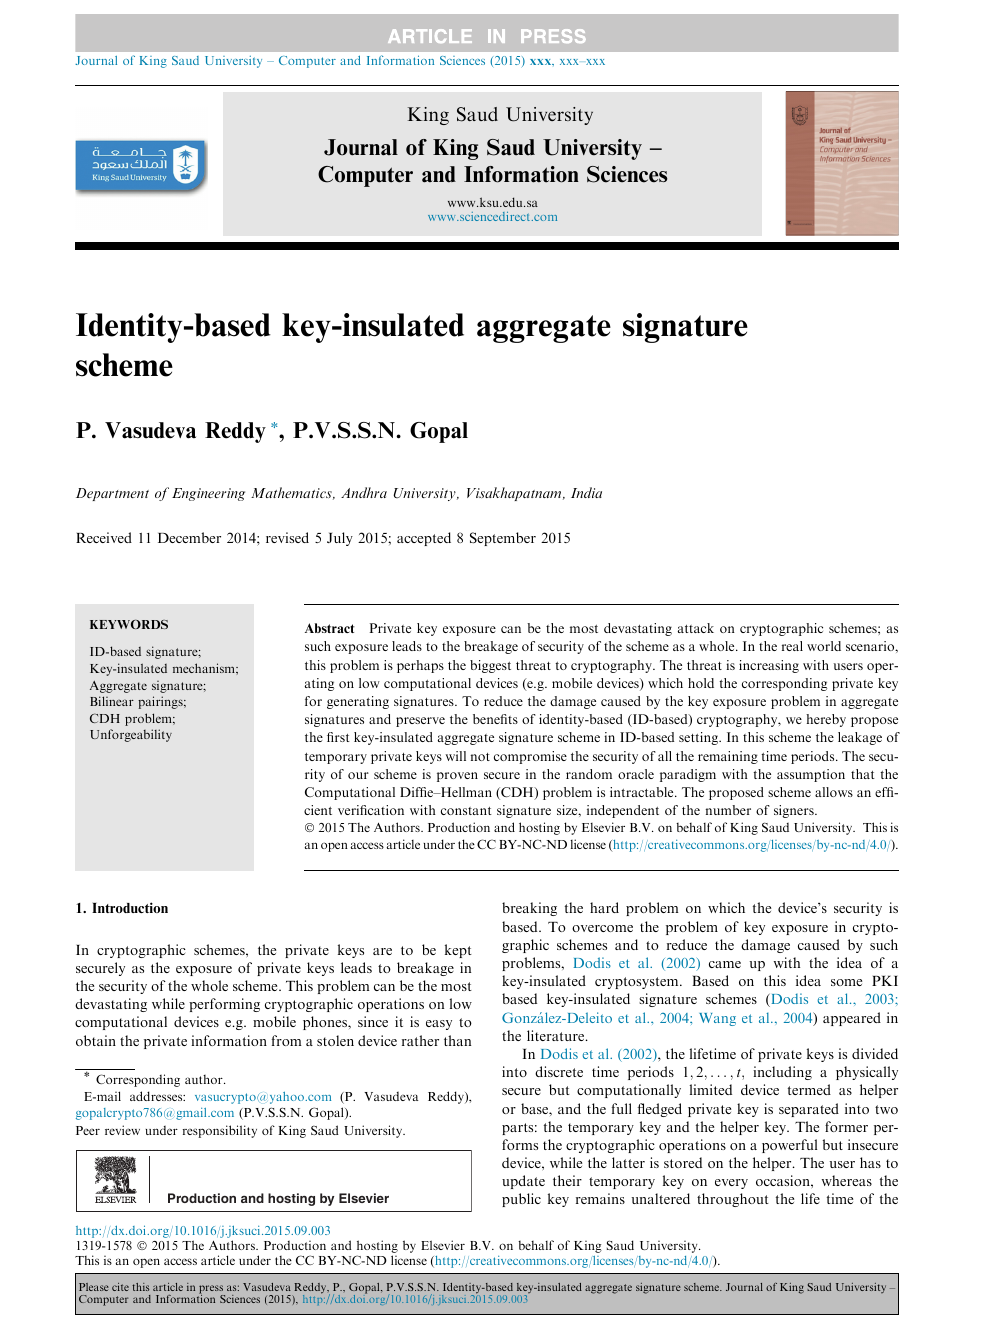 Identity Based Key Insulated Aggregate Signature Scheme Topic Of Research Paper In Computer And Information Sciences Download Scholarly Article Pdf And Read For Free On Cyberleninka Open Science Hub